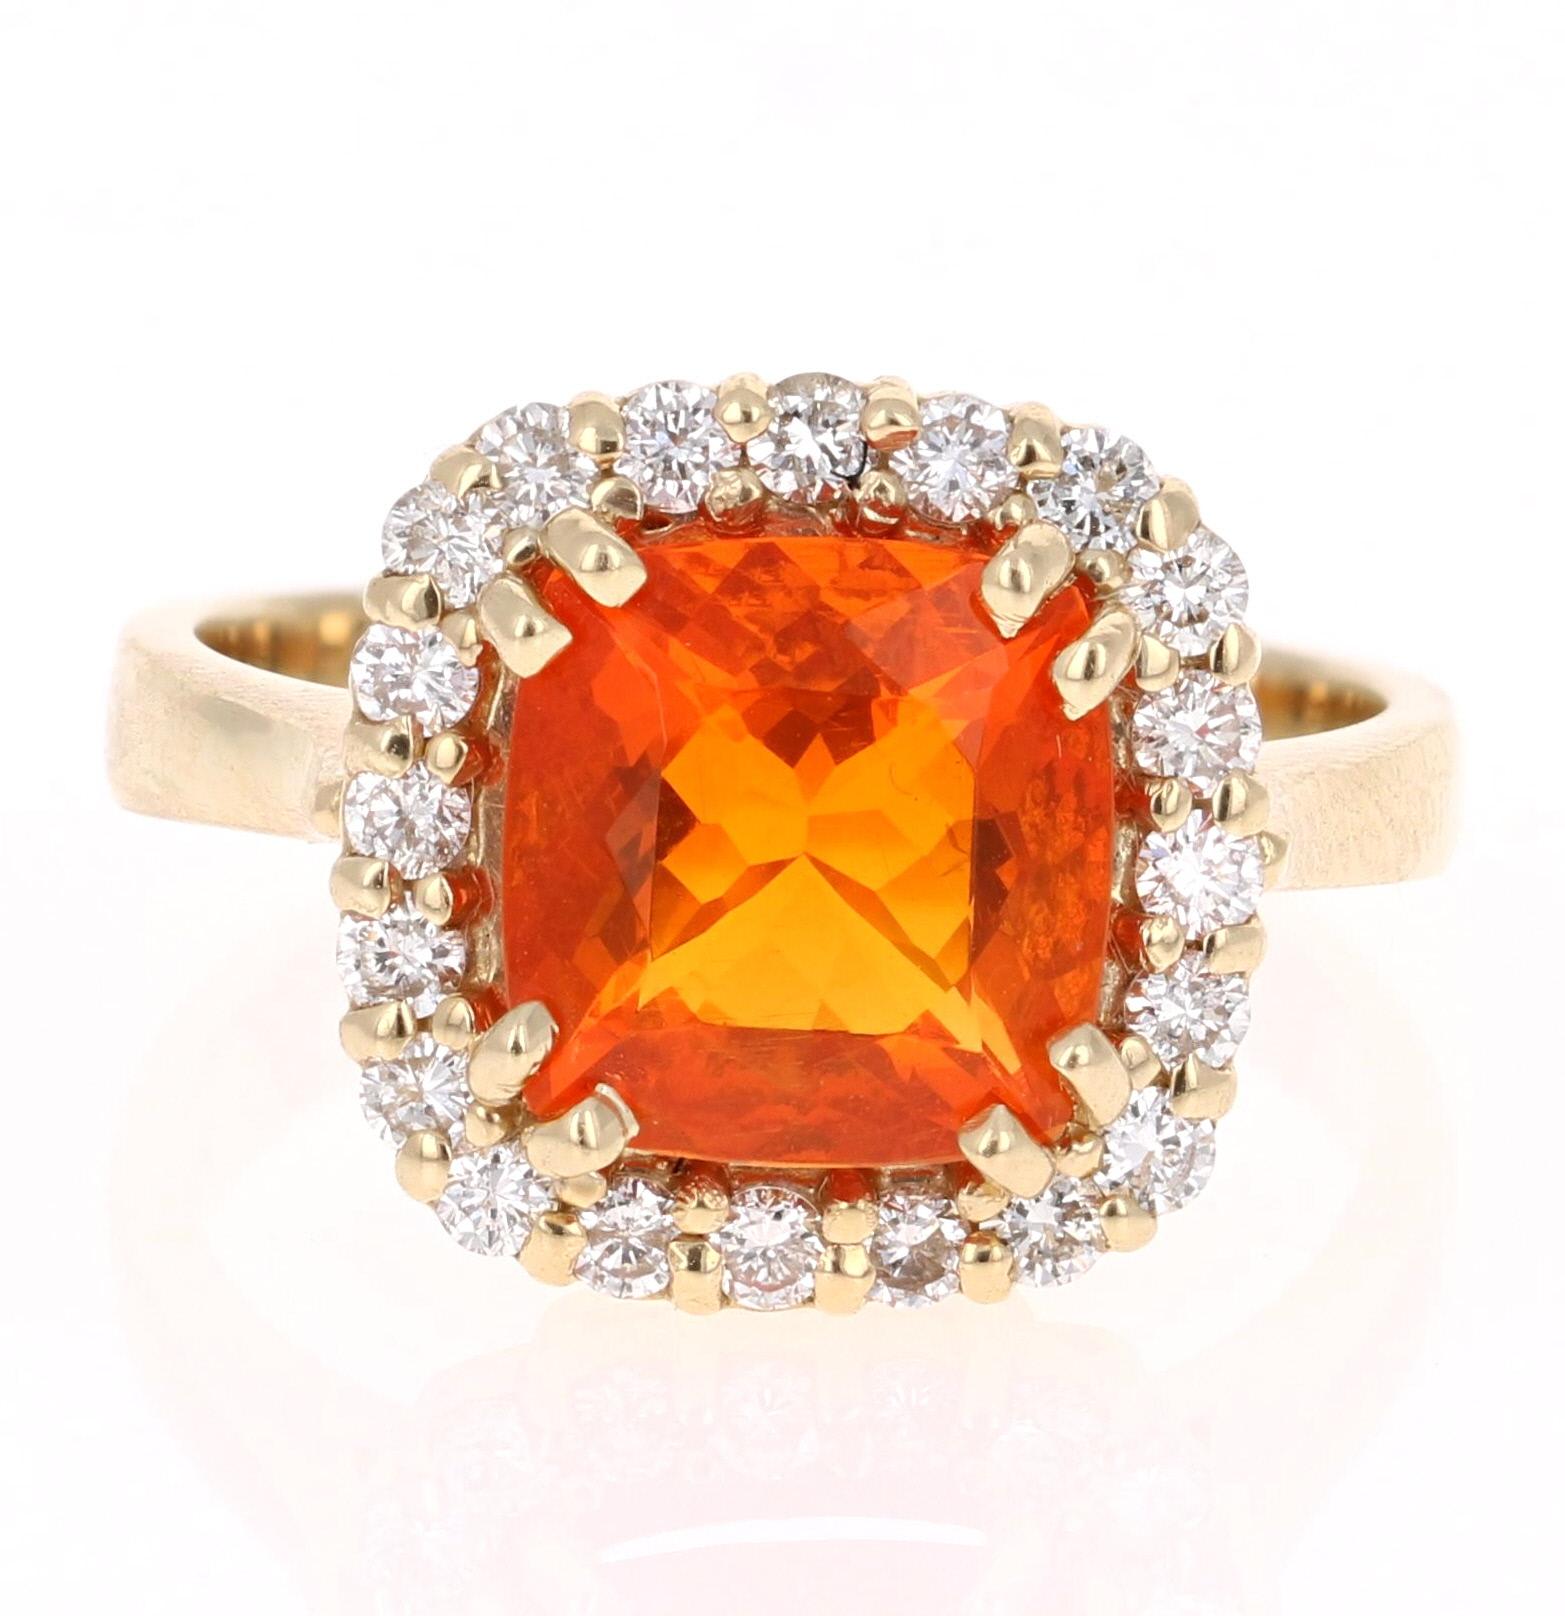 A beautiful Fire Opal and Diamond Ring that is sure to be a blazing beauty on your hand!

This ring has a 1.98 Carat Fire Opal that has a blazing orange hue. It is surrounded by a halo of 20 Round Brilliant Cut Diamonds that weighs 0.50 Carats. The